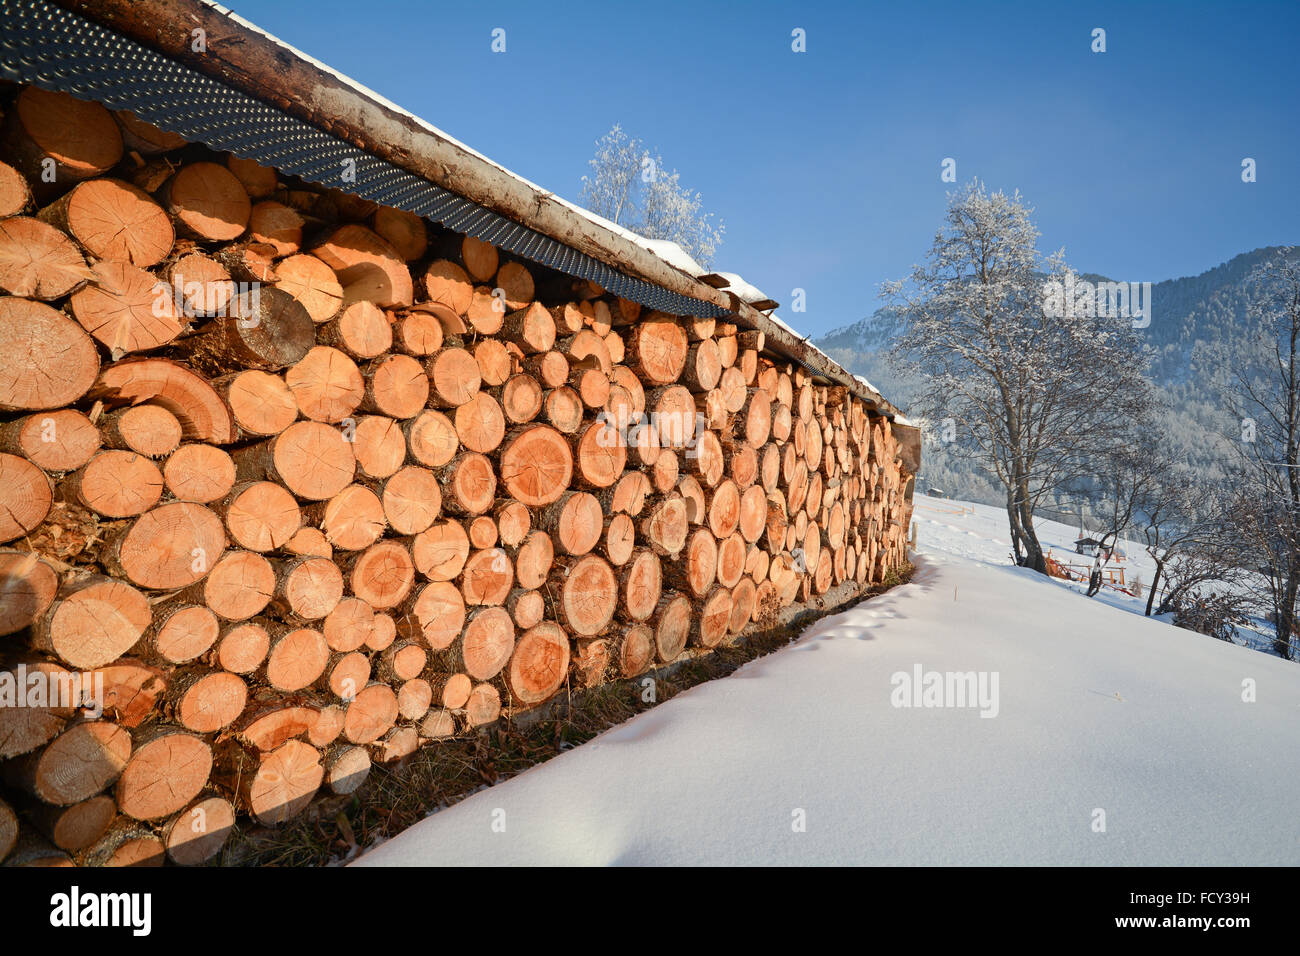 Winter landscape with firewood in front of an old barn, Pitztal Alps - Tyrol Austria Stock Photo